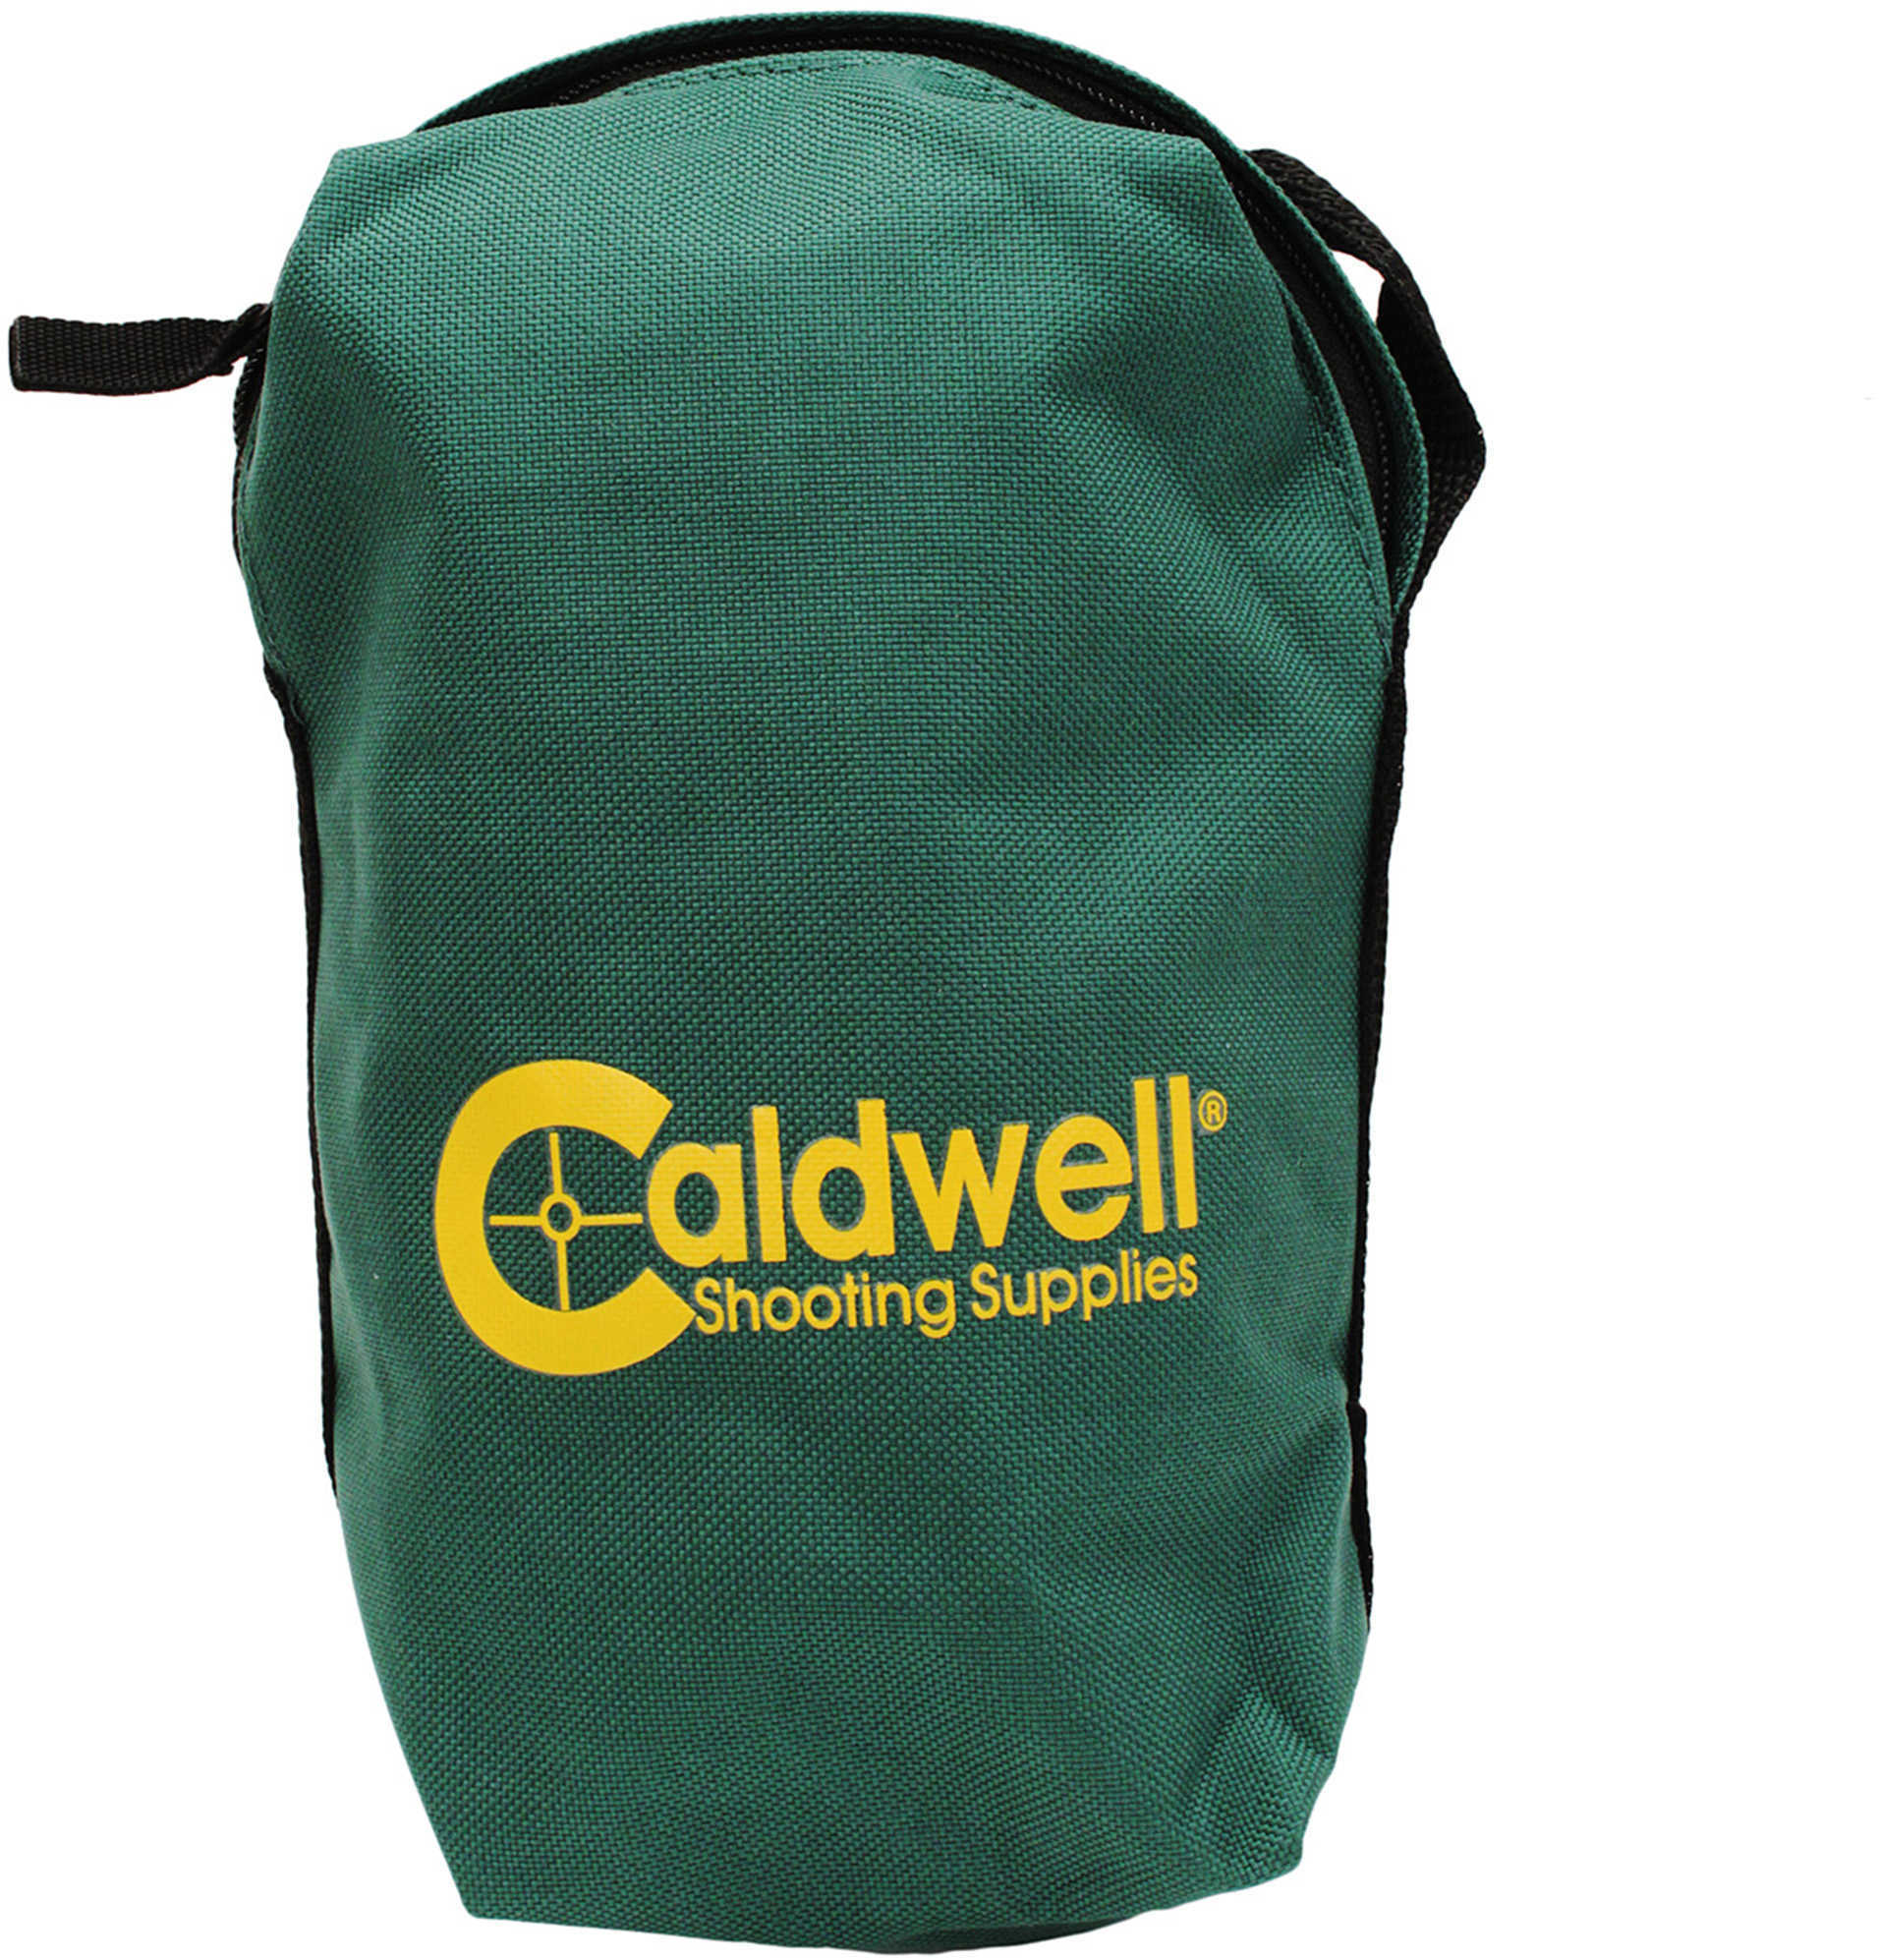 Caldwell Lead Sled Weight Bag Large (4)